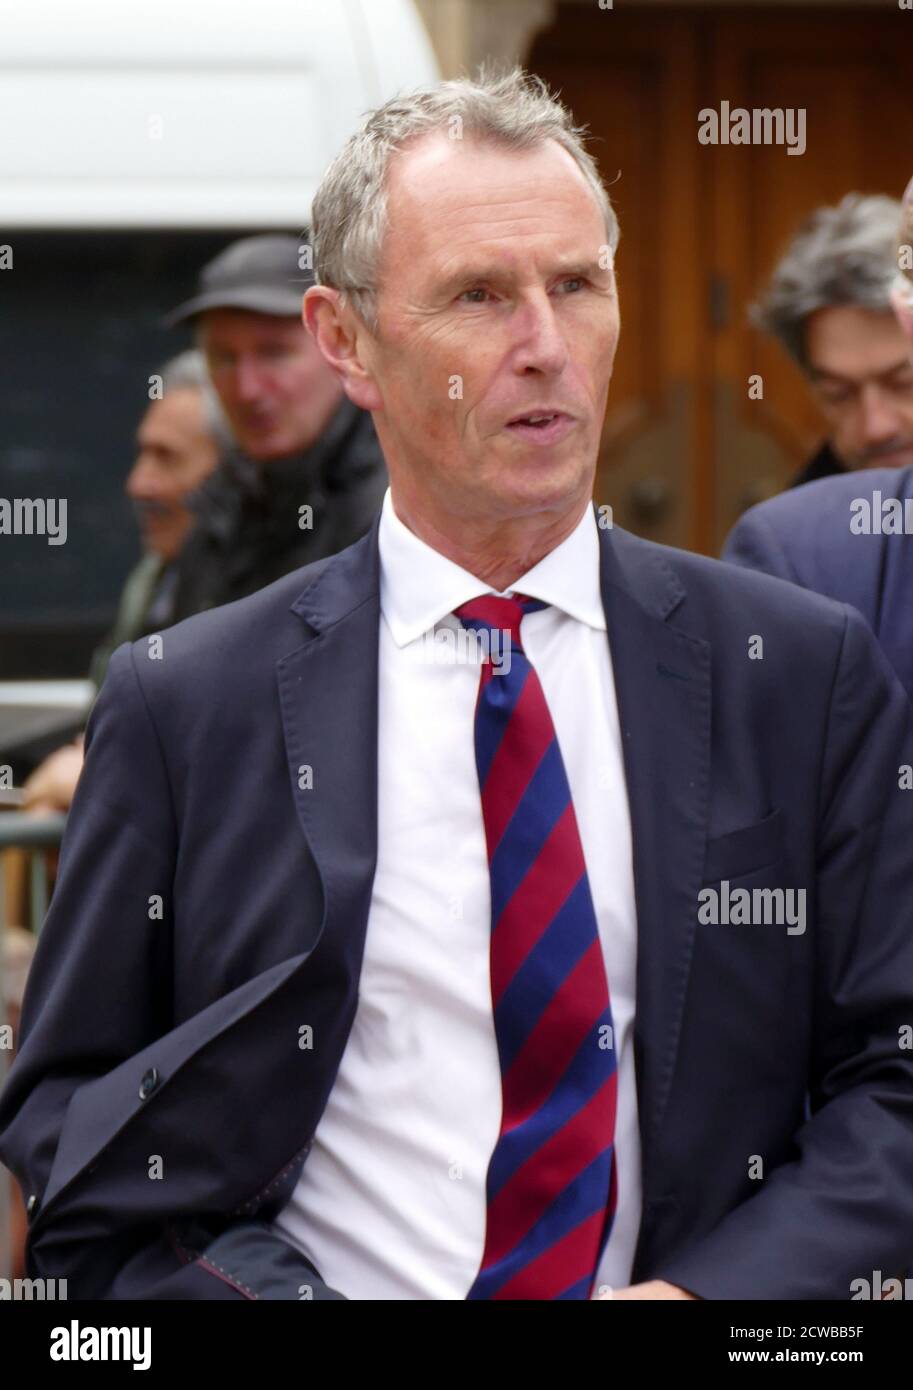 Nigel Evans (born 1957), British Conservative Party politician serving as Joint Executive Secretary of the 1922 Committee since 2017. Member of Parliament for the Ribble Valley in Lancashire since 1992. He is a strong critic of the European Union and supported Brexit in the 2016 EU Referendum. Stock Photo